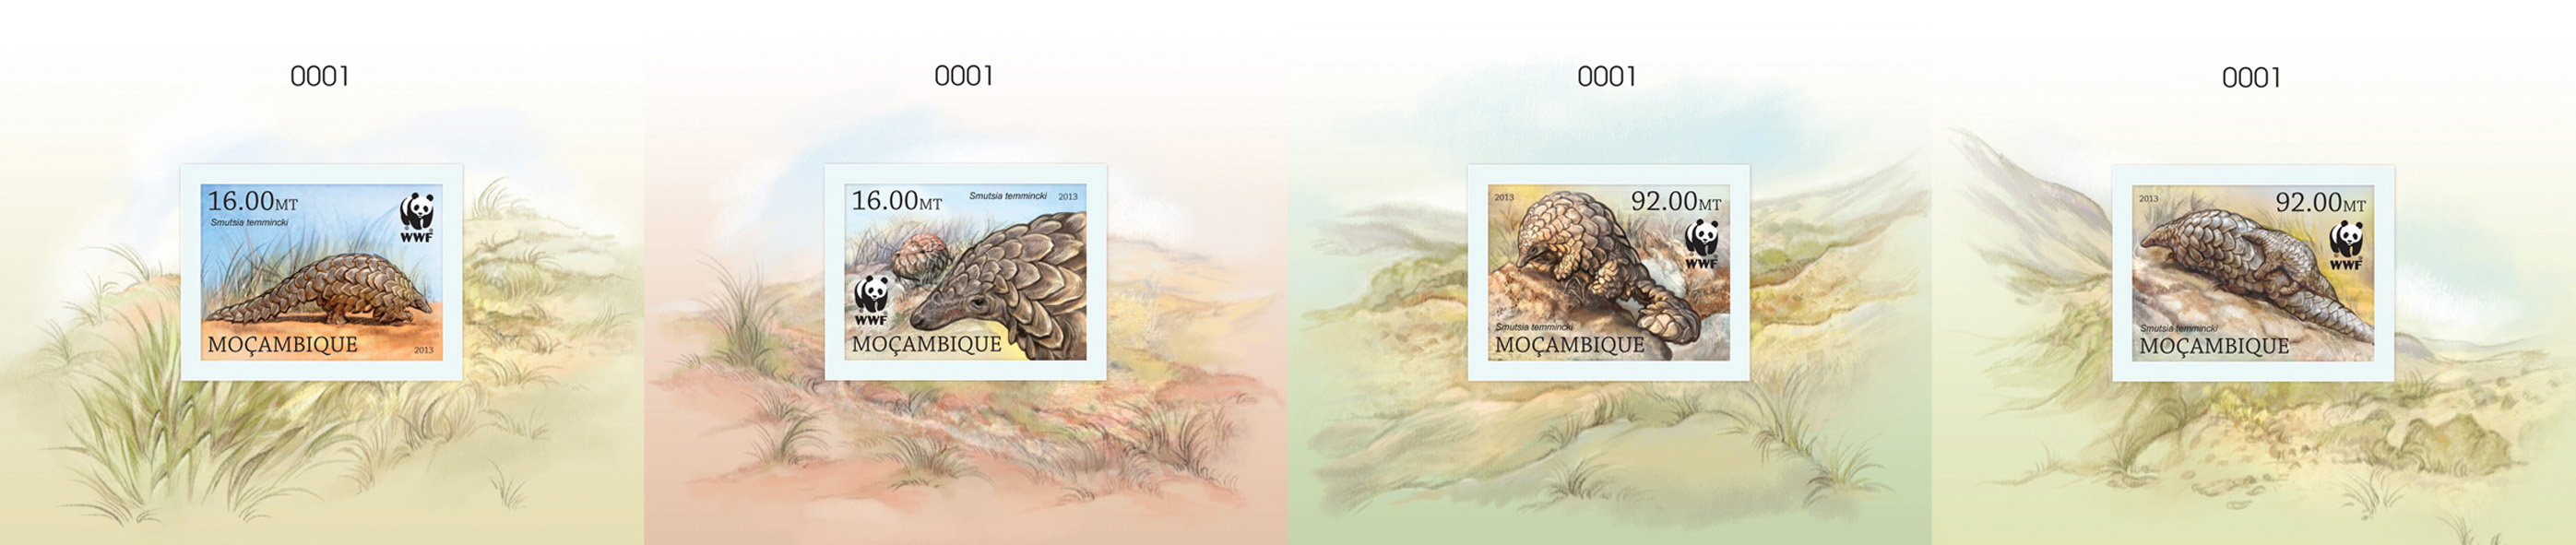 WWF - Pangolin - Issue of Mozambique postage Stamps